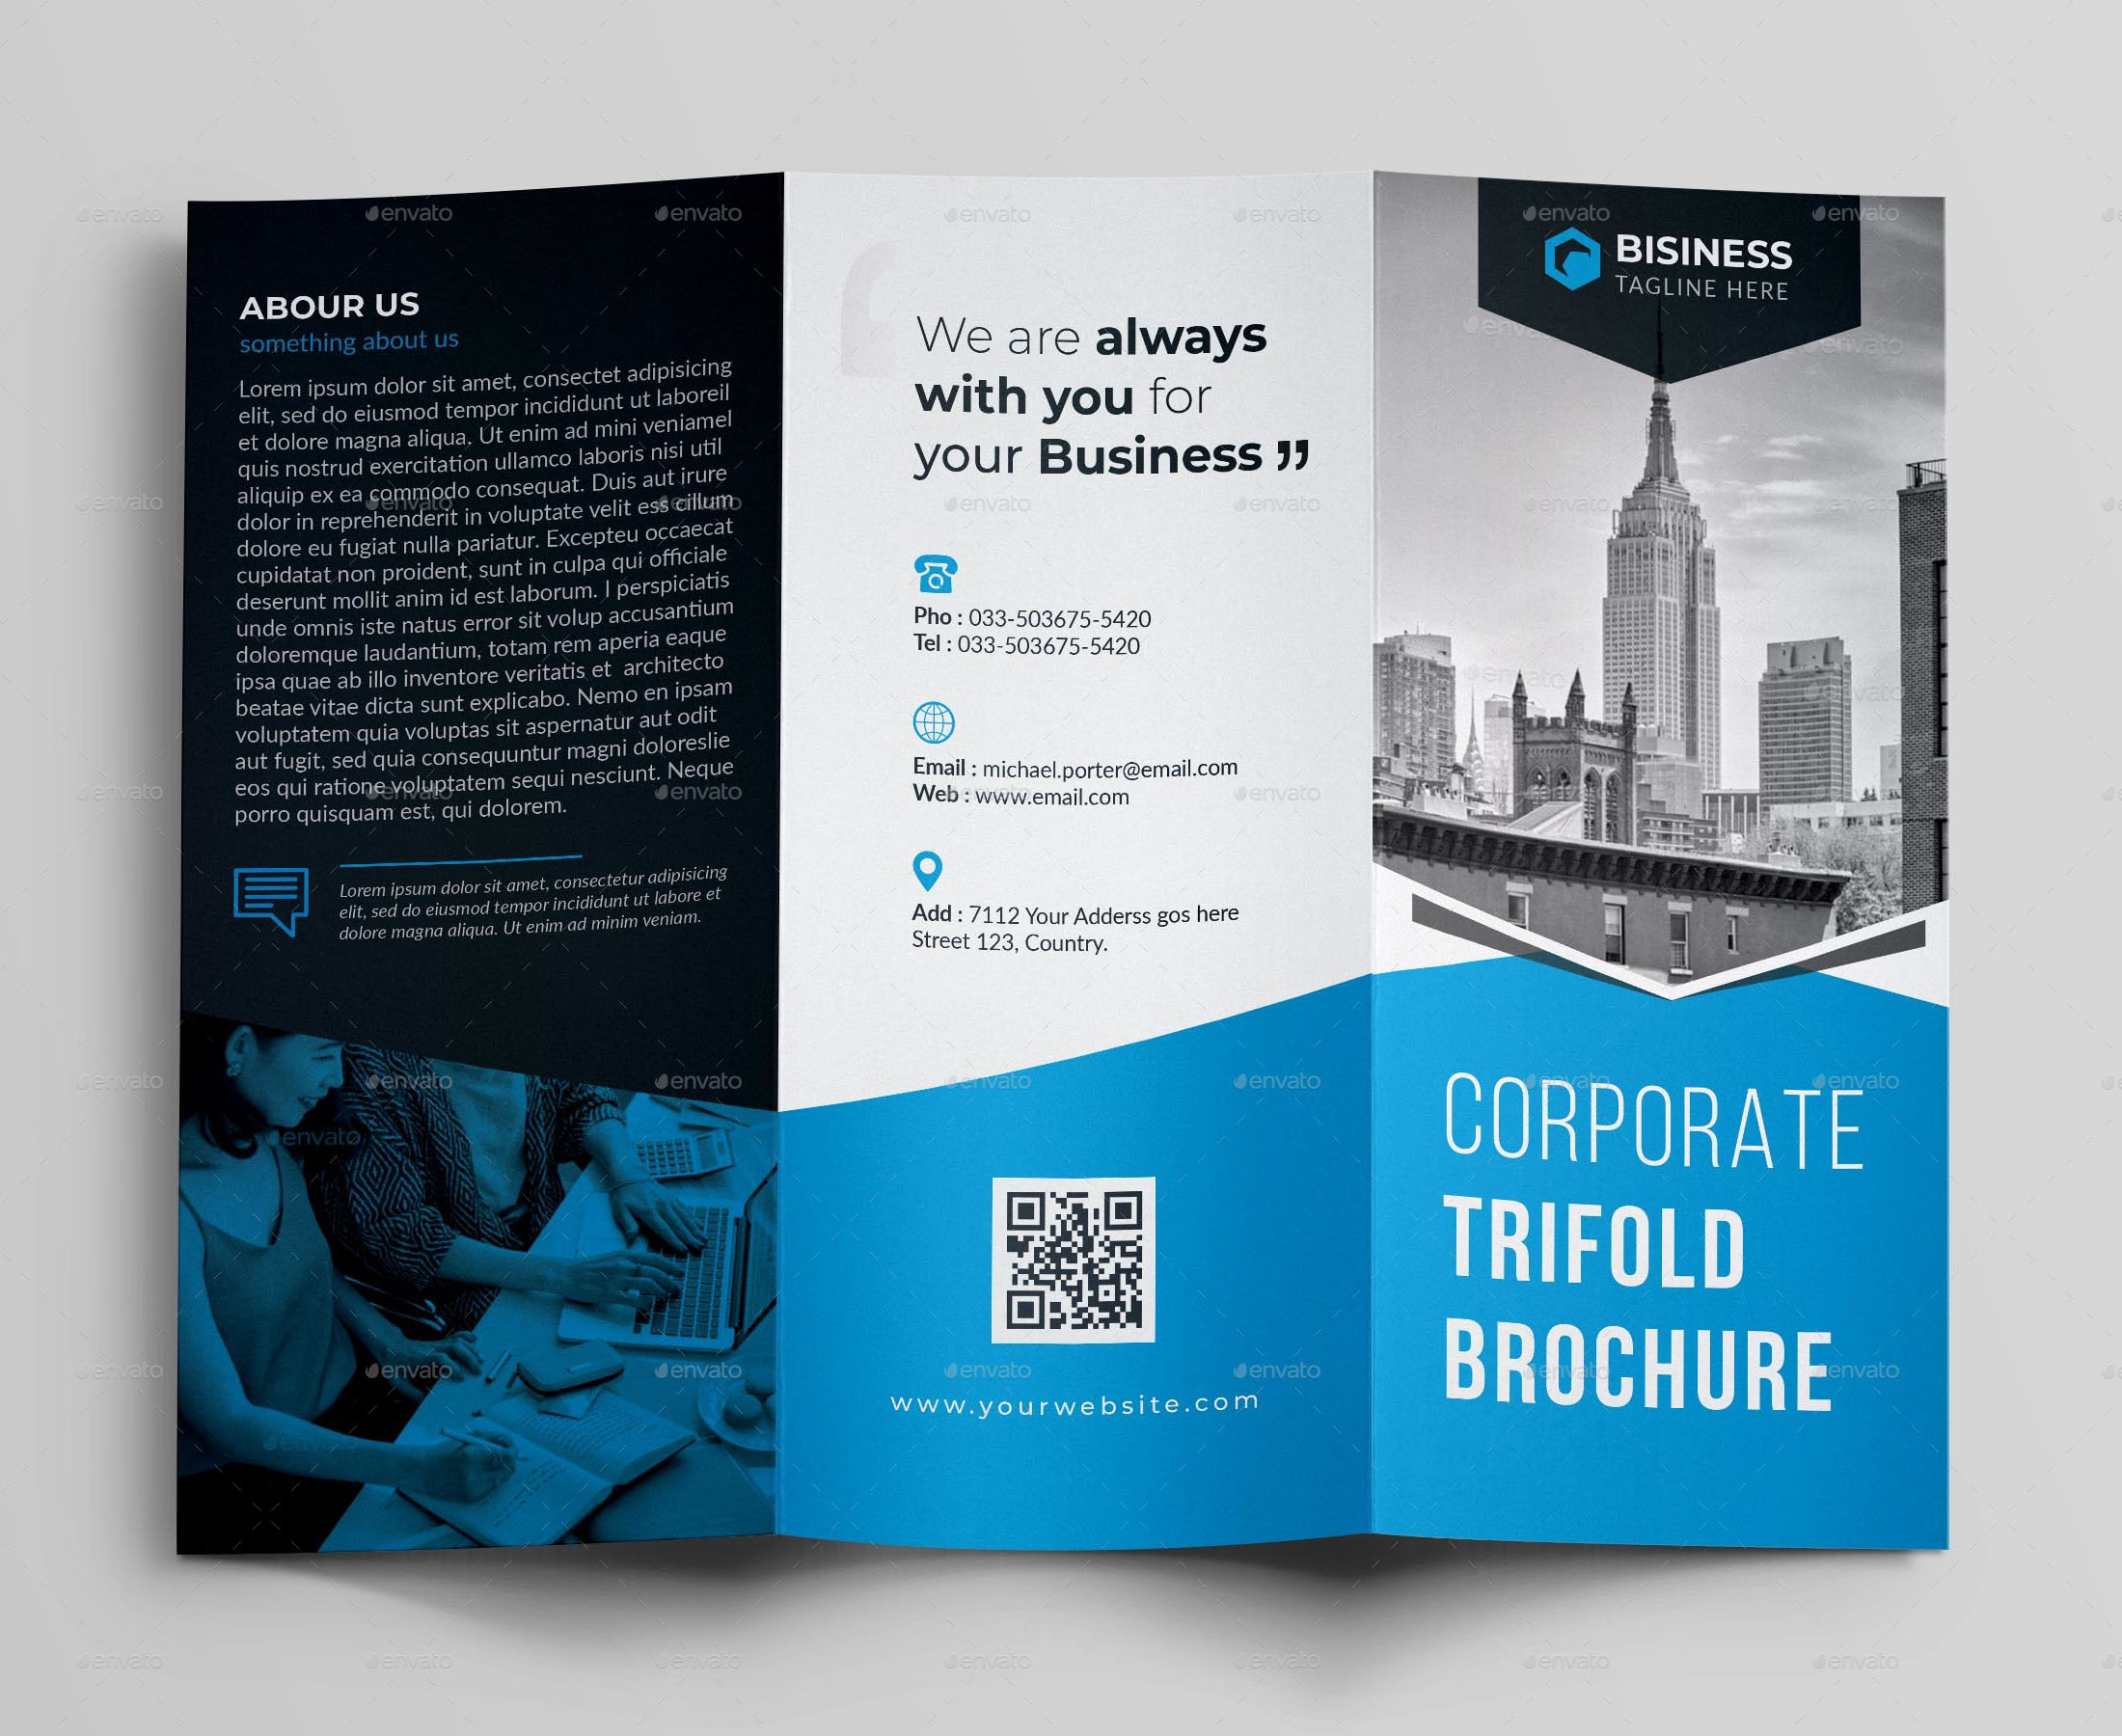 76+ PREMIUM & FREE BUSINESS BROCHURE TEMPLATES PSD TO DOWNLOAD! Free